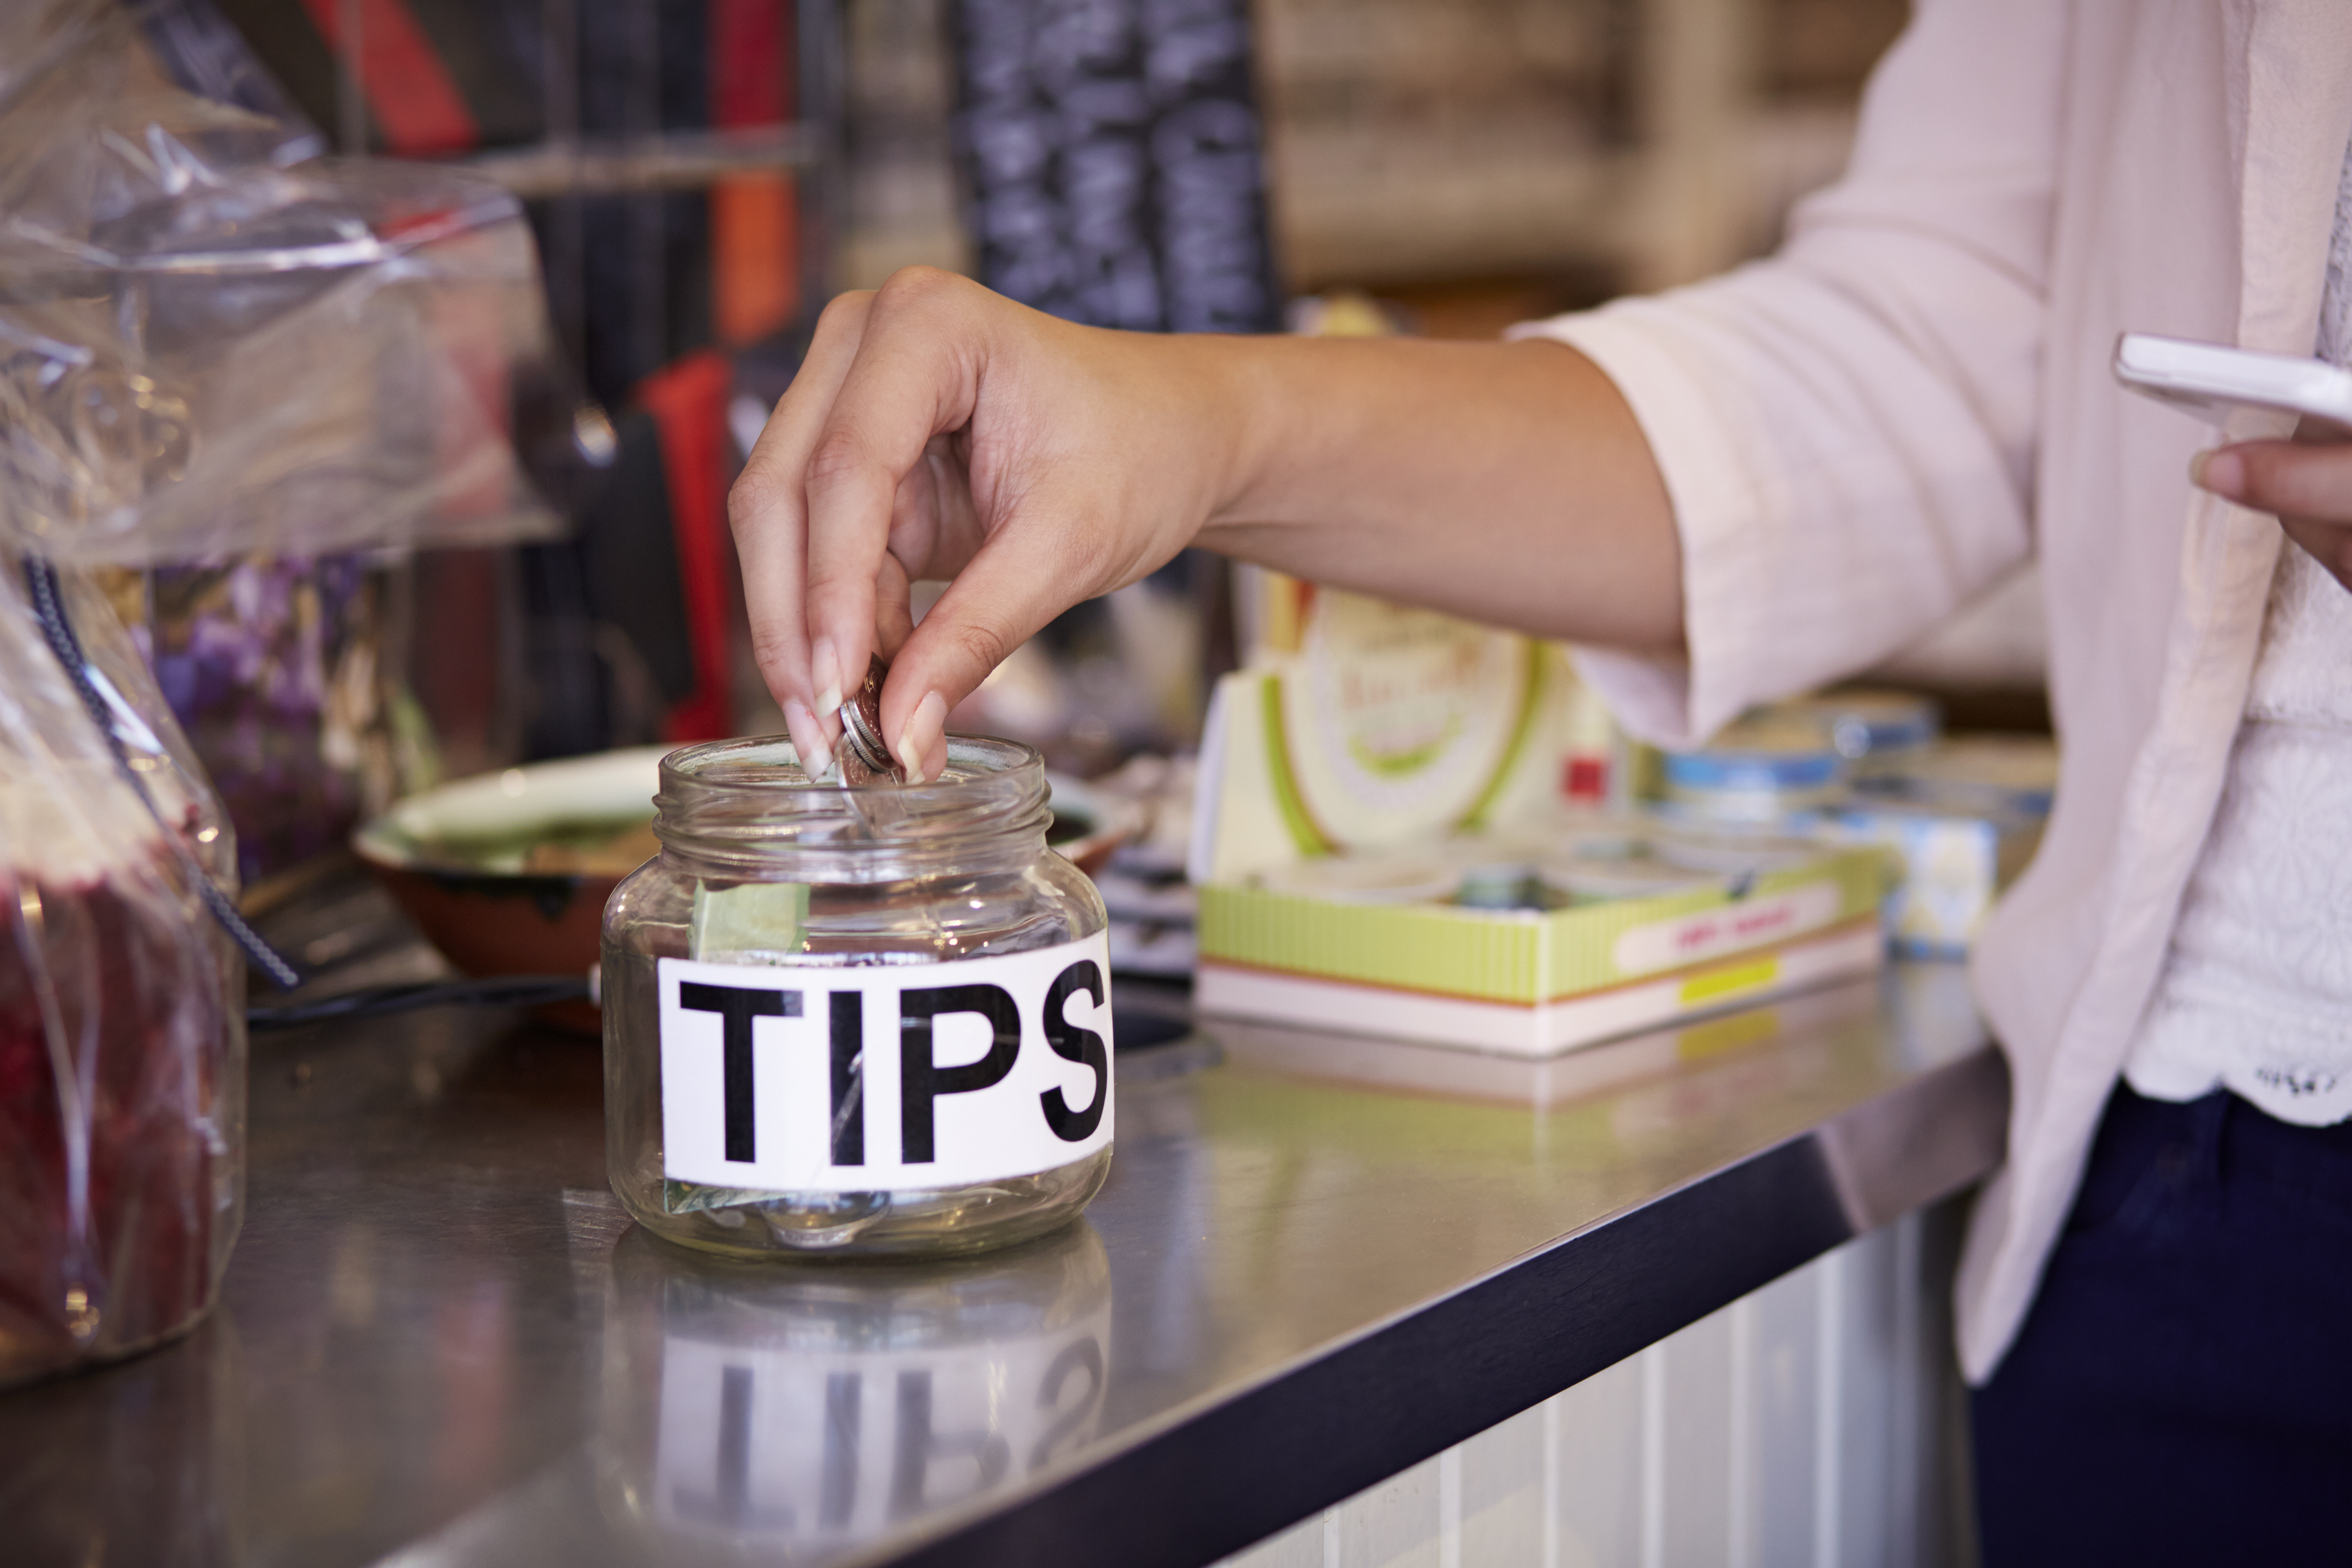 This New Poll Just Revealed Who America's Best Tippers Are